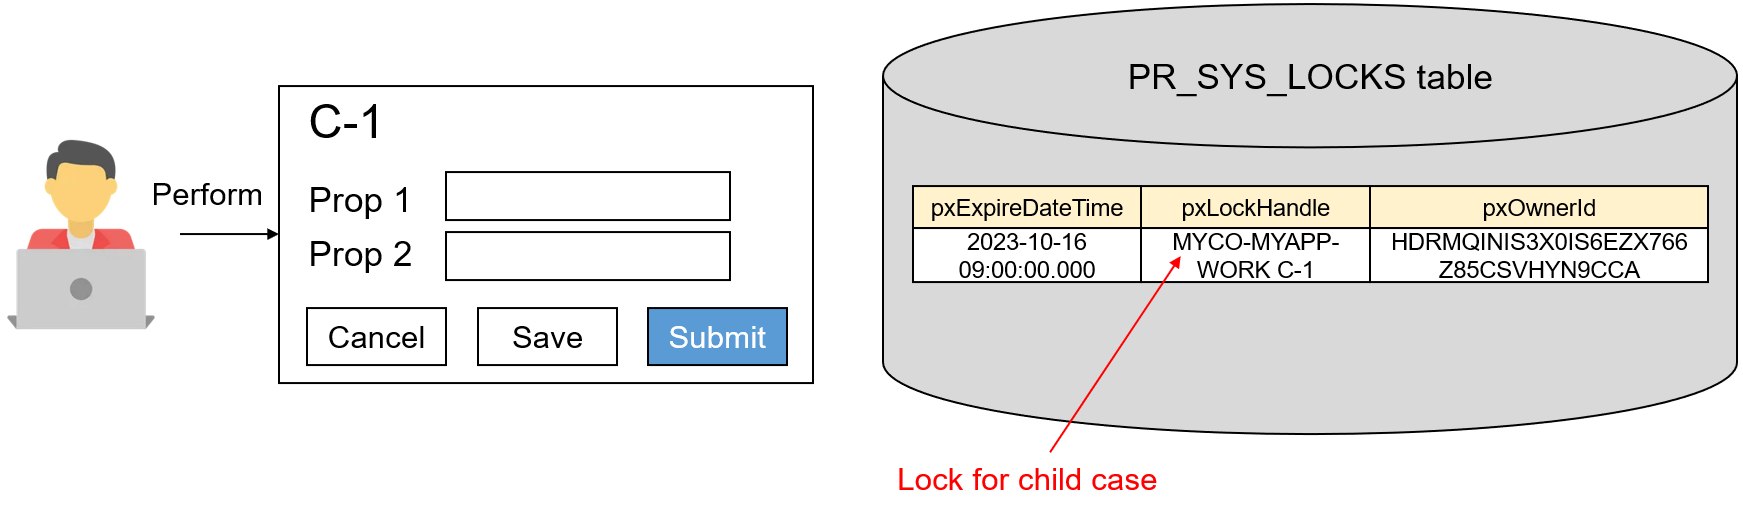 PR_SYS_LOCKS when child case is locked with checkbox on